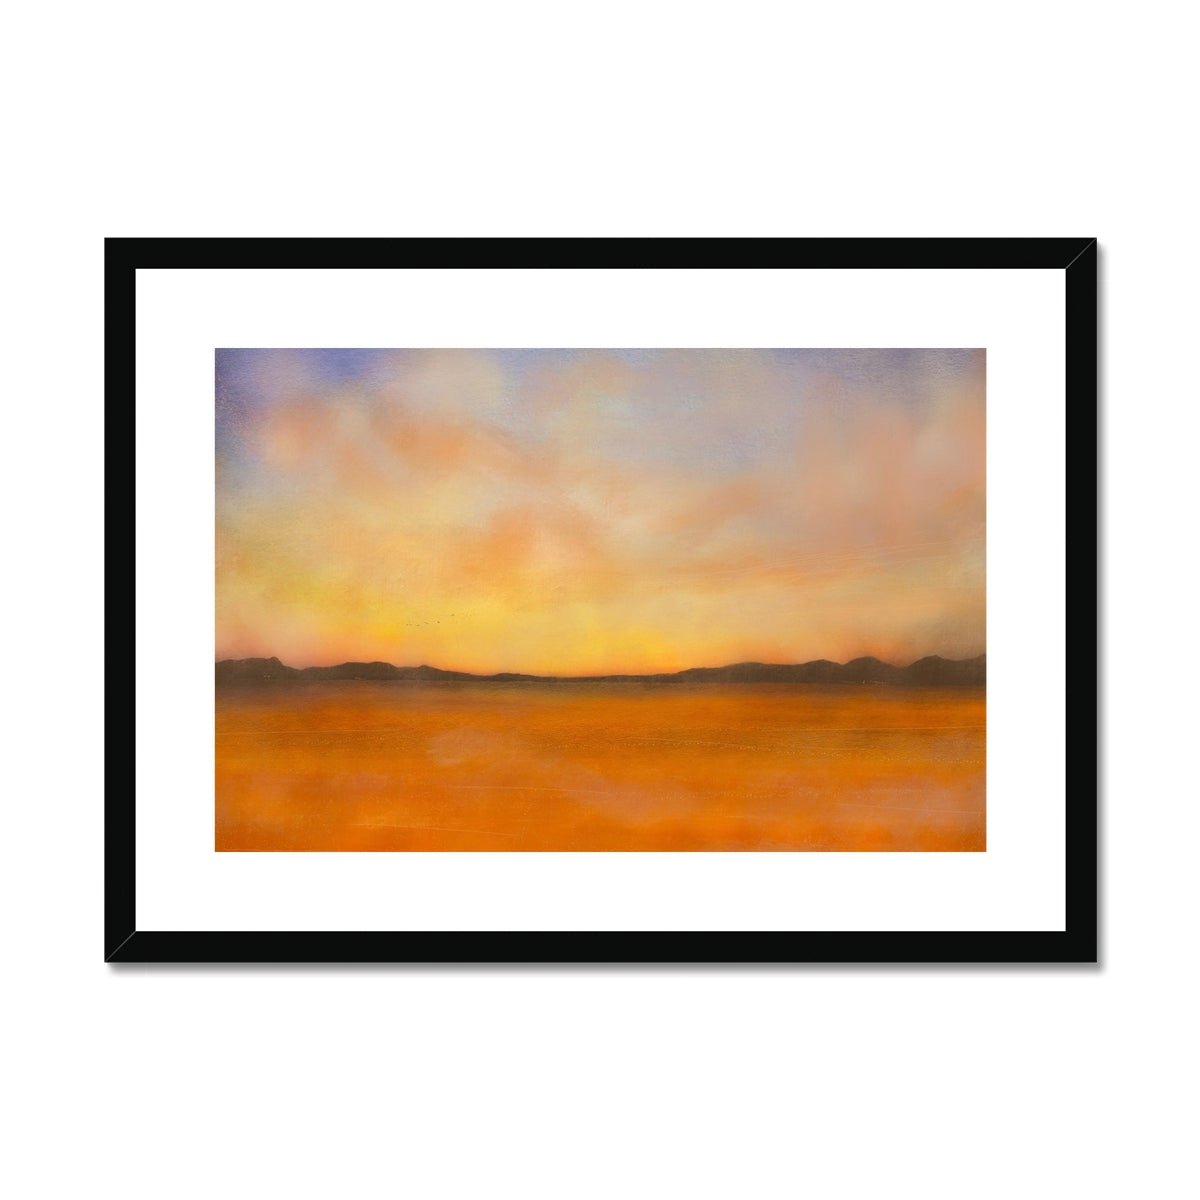 Islay Dawn Painting | Framed & Mounted Prints From Scotland-Framed & Mounted Prints-Hebridean Islands Art Gallery-A2 Landscape-Black Frame-Paintings, Prints, Homeware, Art Gifts From Scotland By Scottish Artist Kevin Hunter